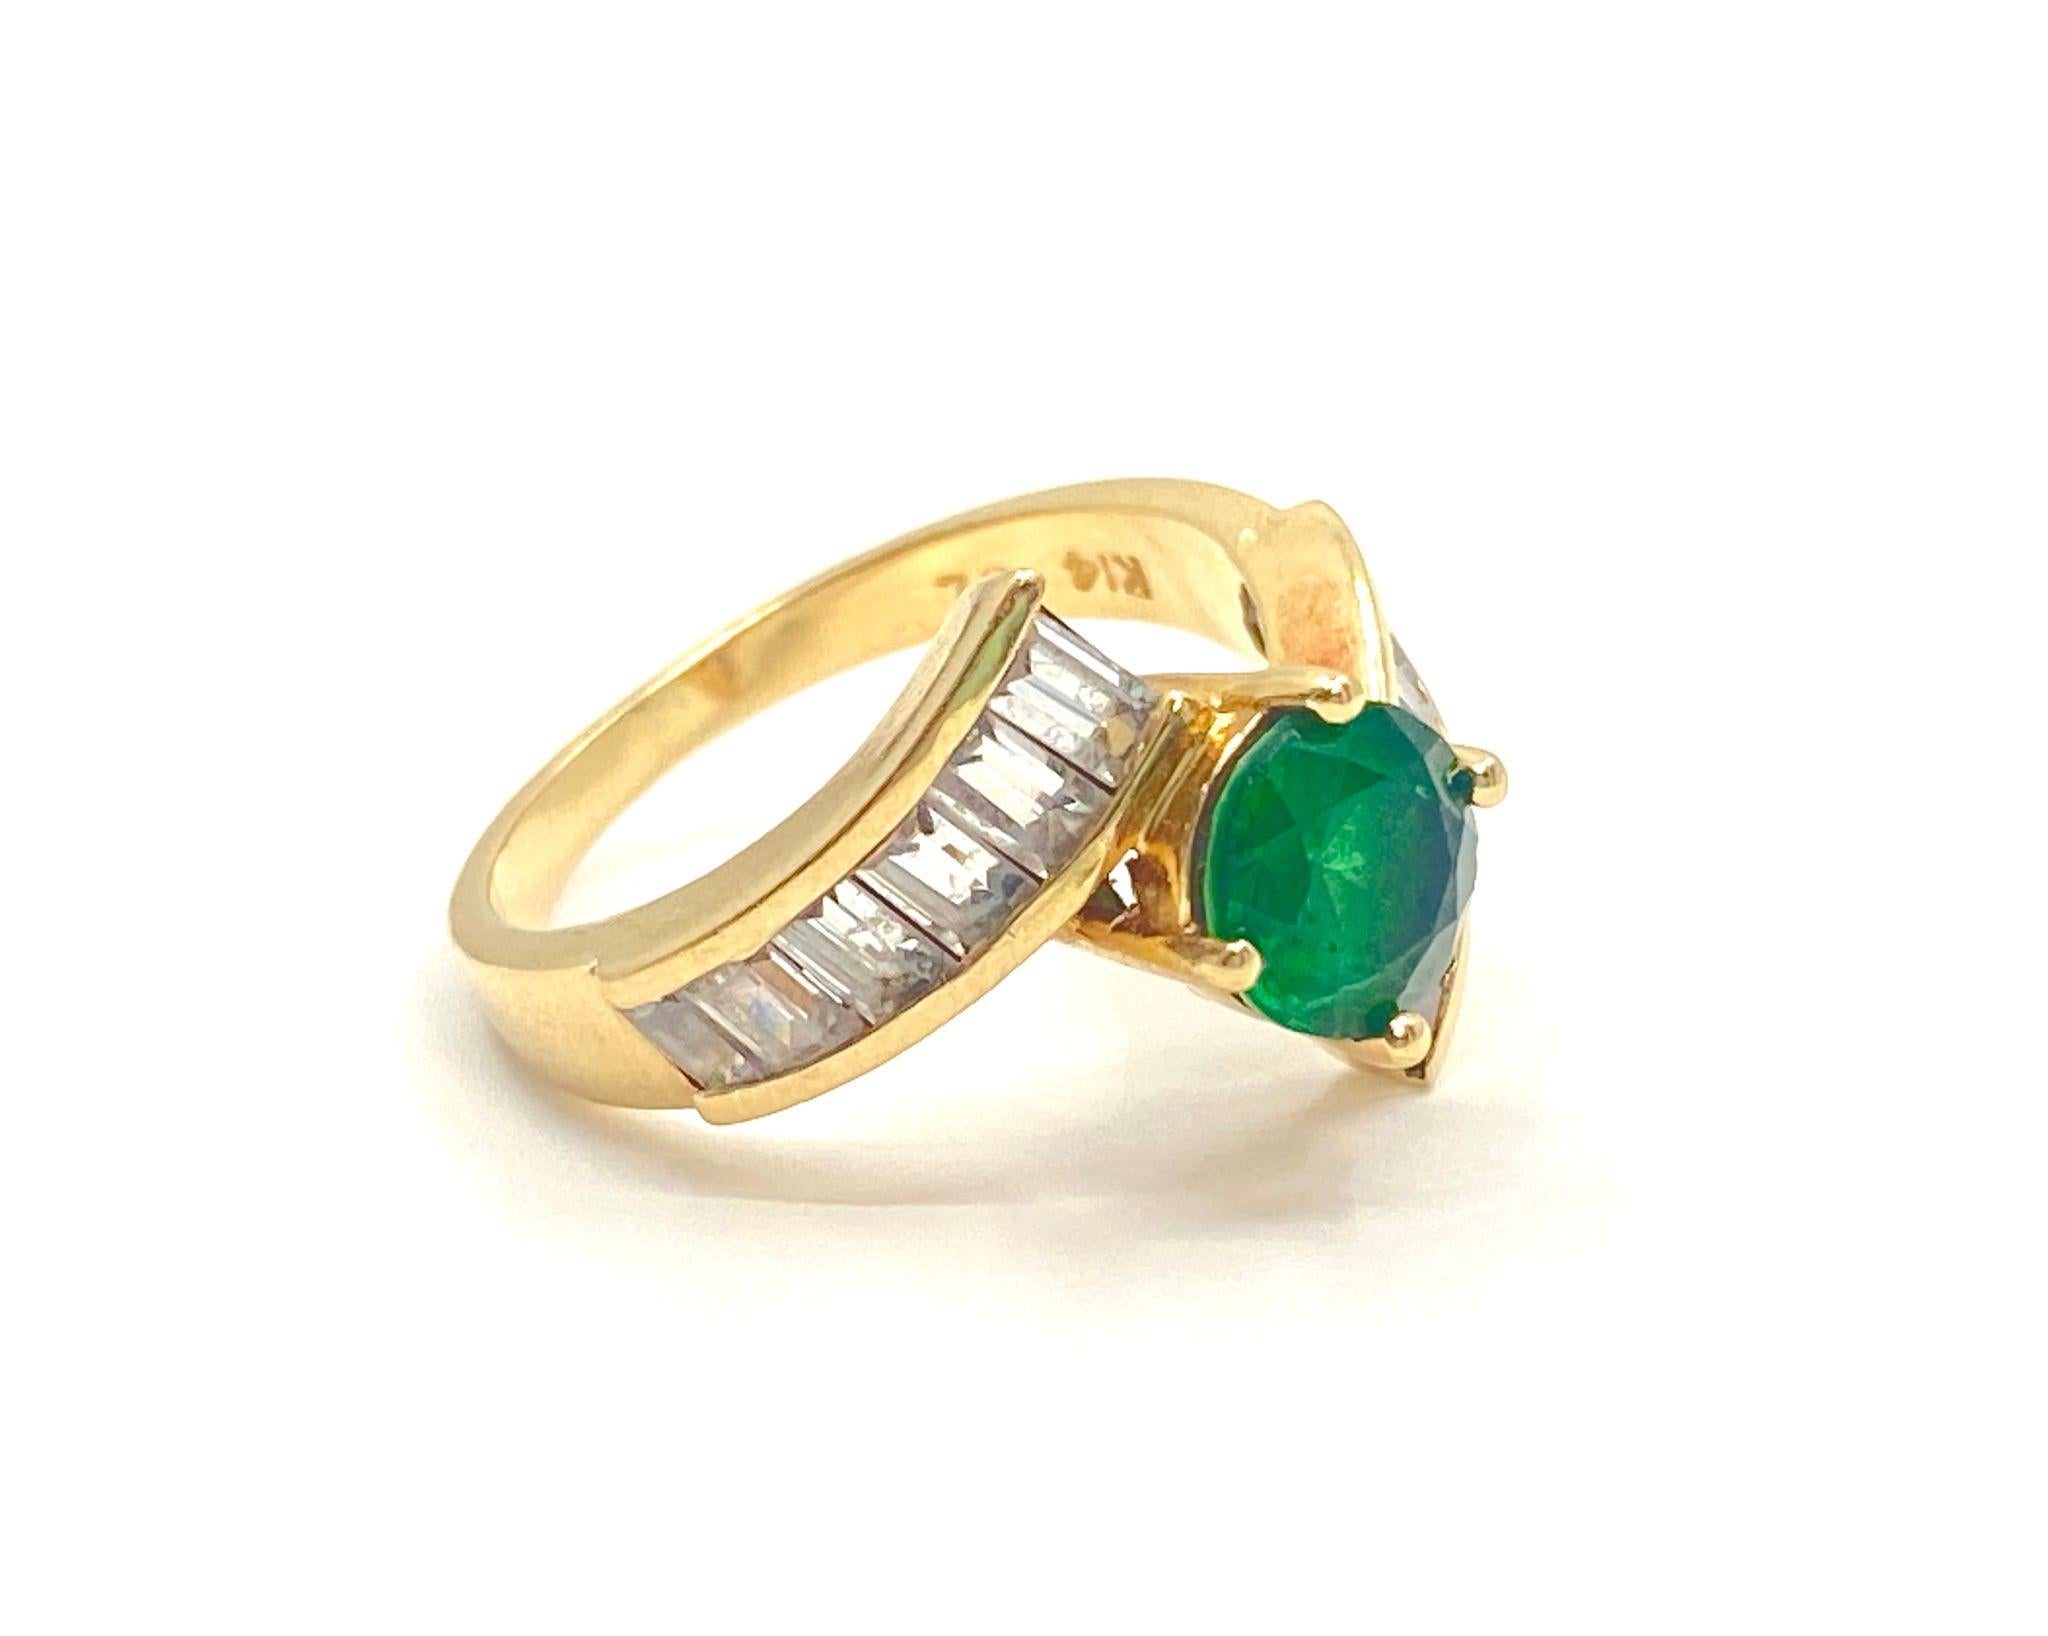 Embrace the elegance of the Art Deco era with this exquisite women's ring crafted from 14k yellow gold, showcasing a captivating 2.25 carat round-cut emerald. Accentuating the design are 1.25 carats of baguette-cut diamonds with SI clarity and G